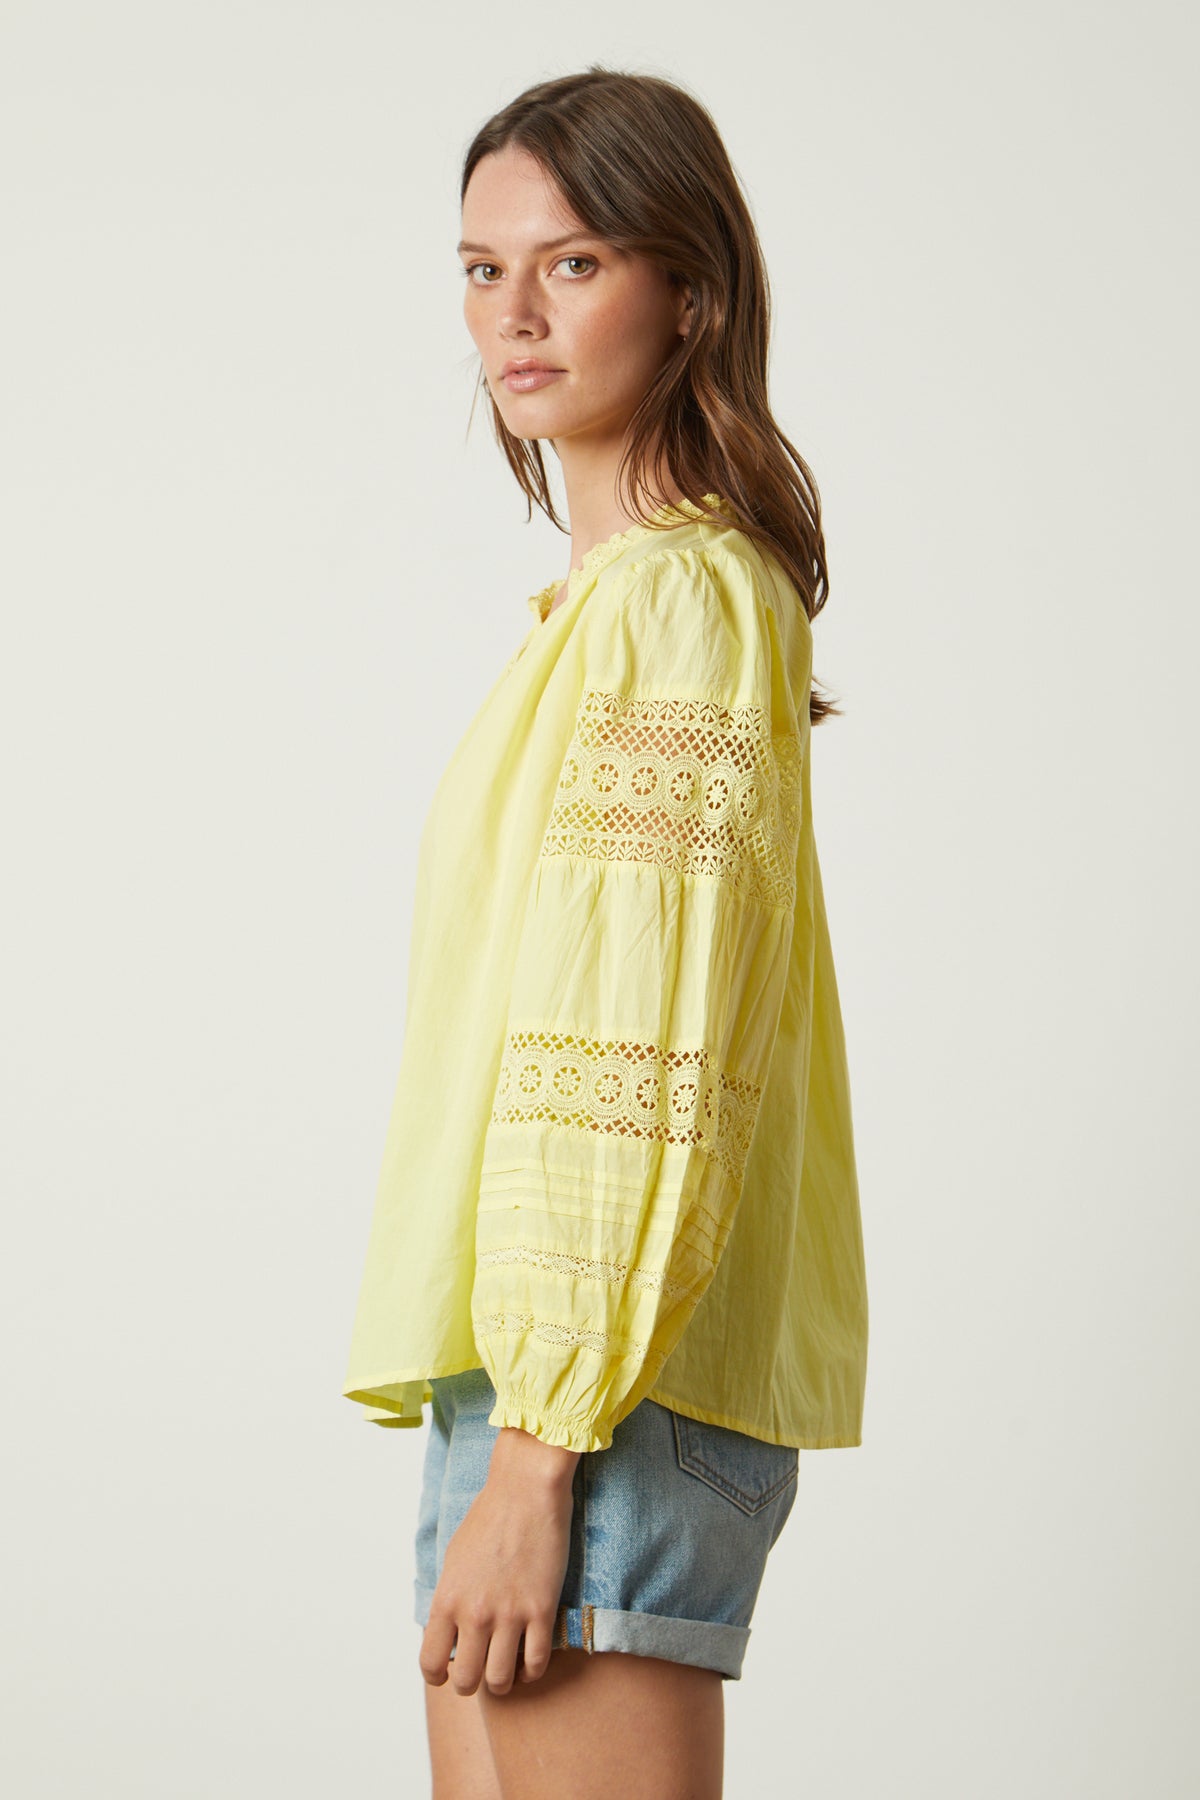 The model is wearing a yellow Velvet by Graham & Spencer blouse with lace sleeves, called the TAYLER COTTON LACE BOHO TOP.-26317098451137